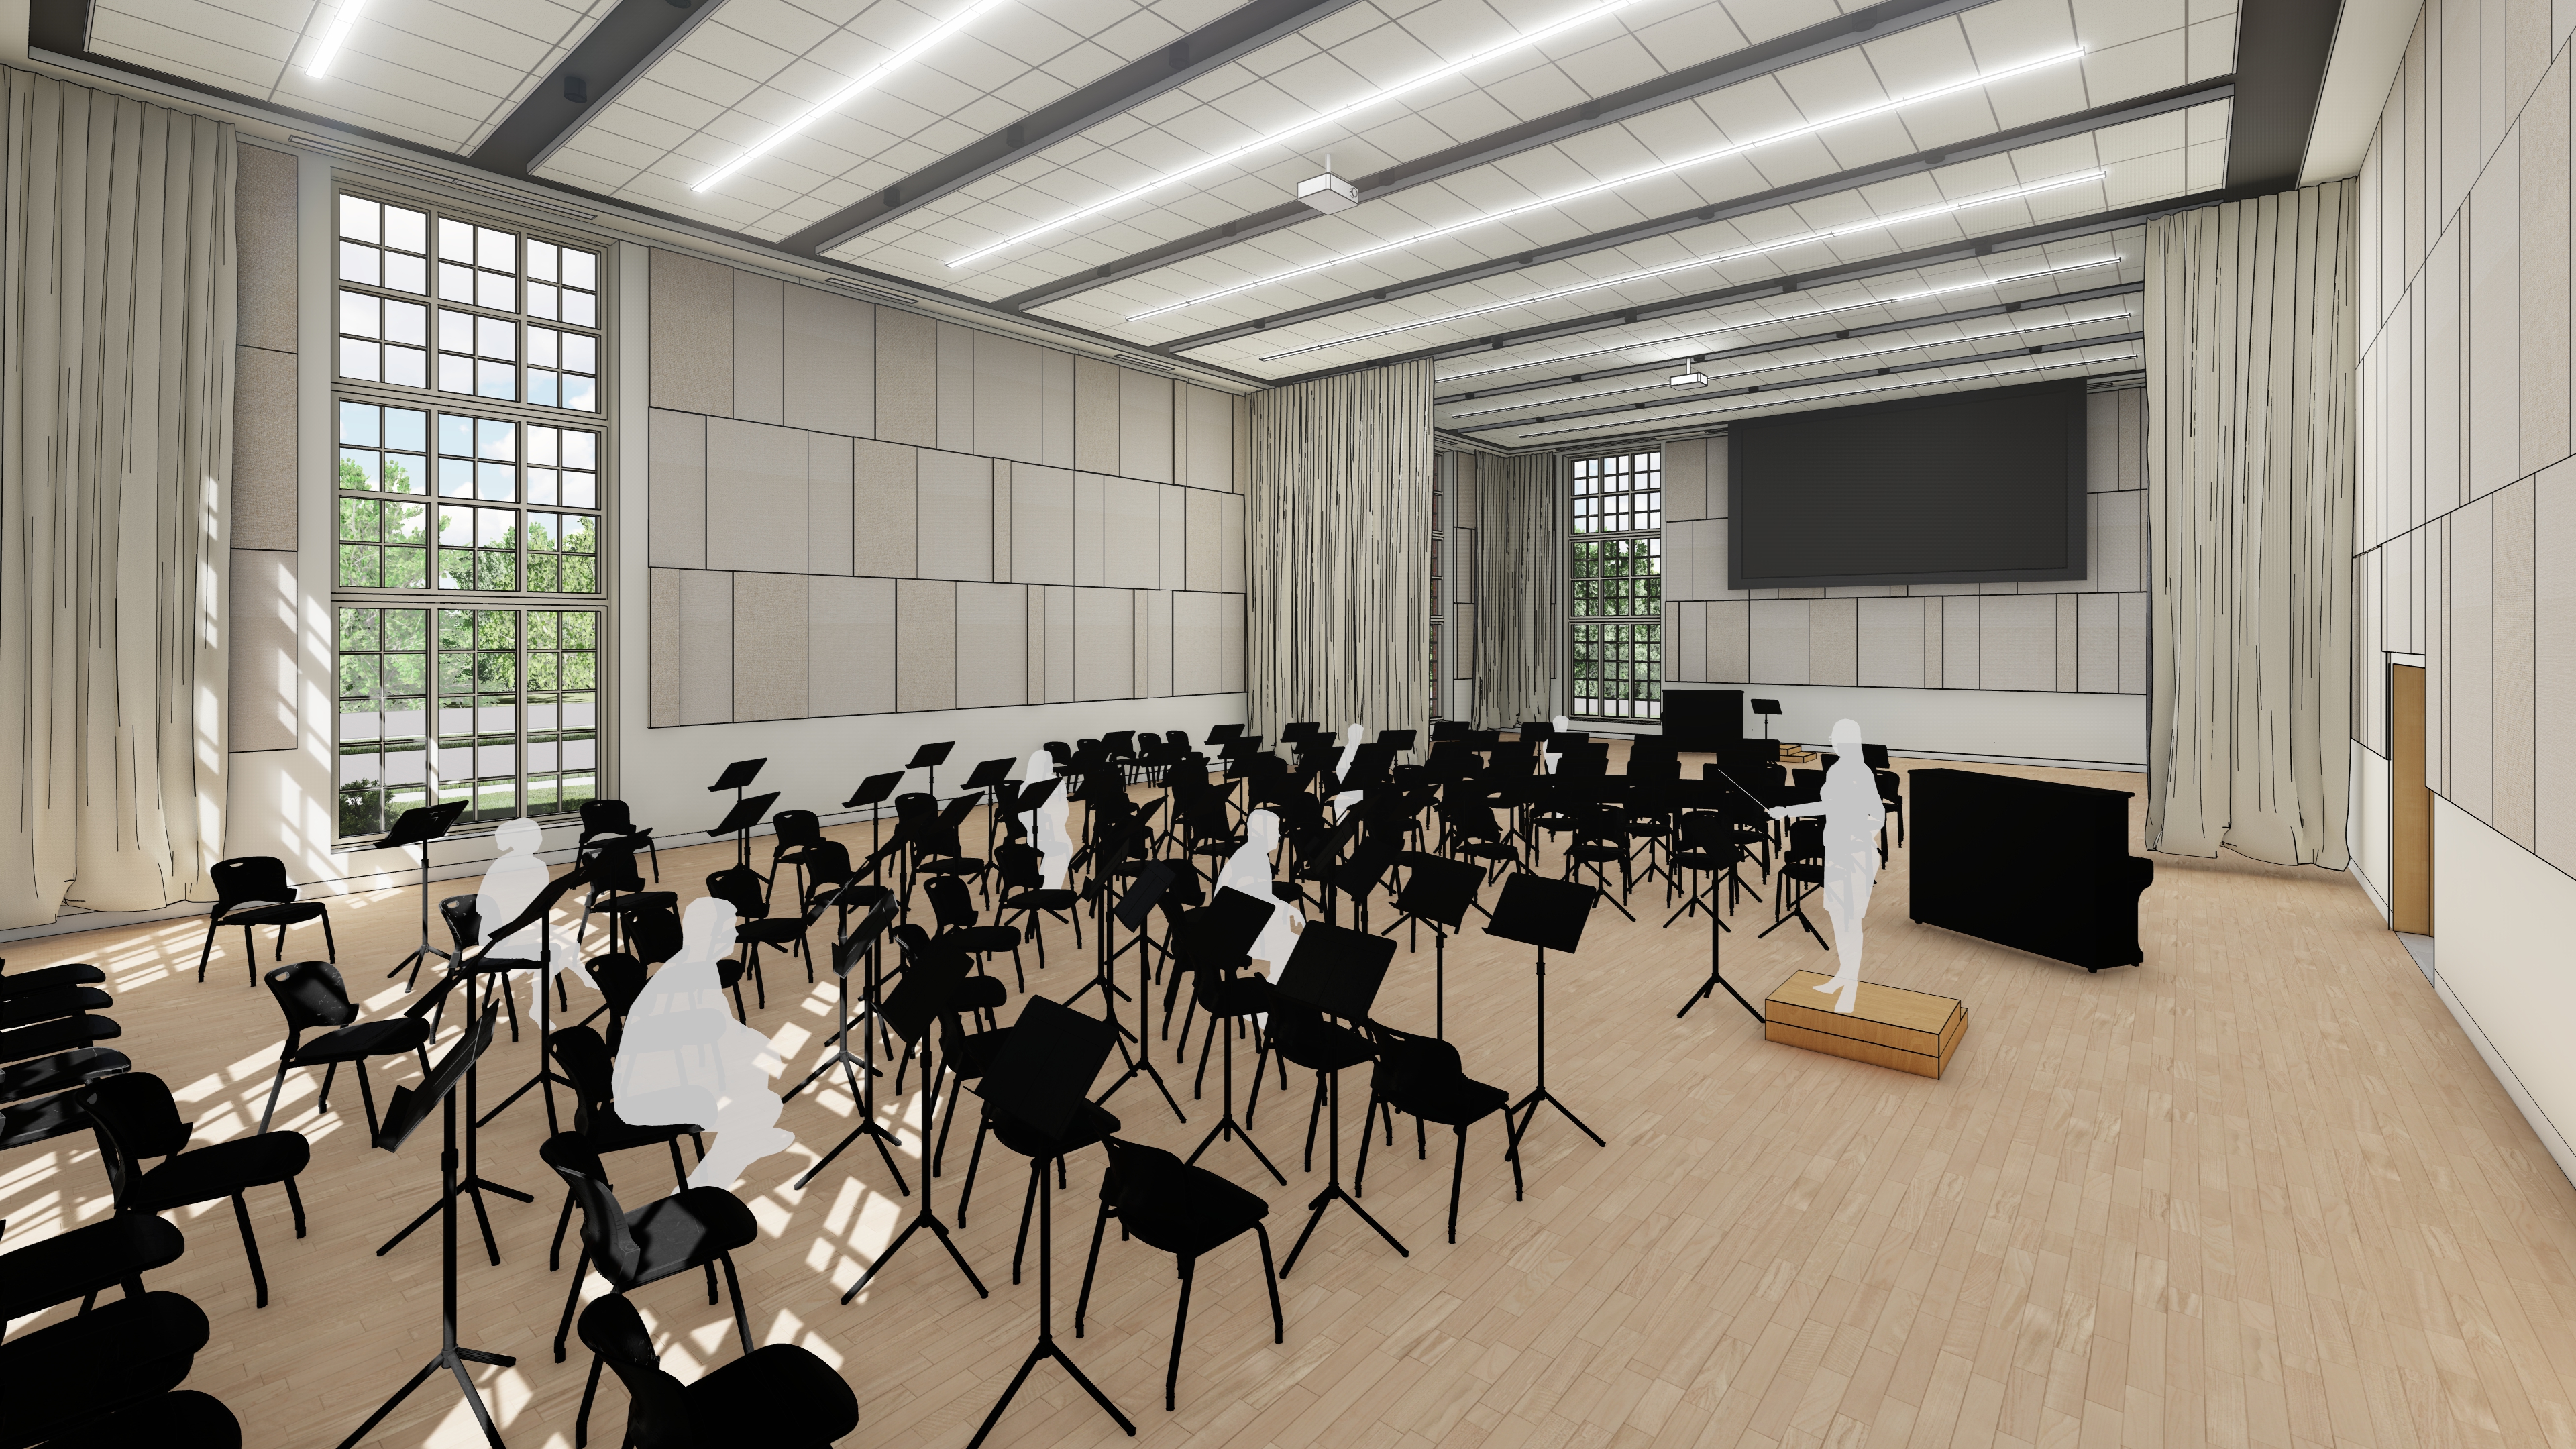 Construction for new music facility to begin this summer